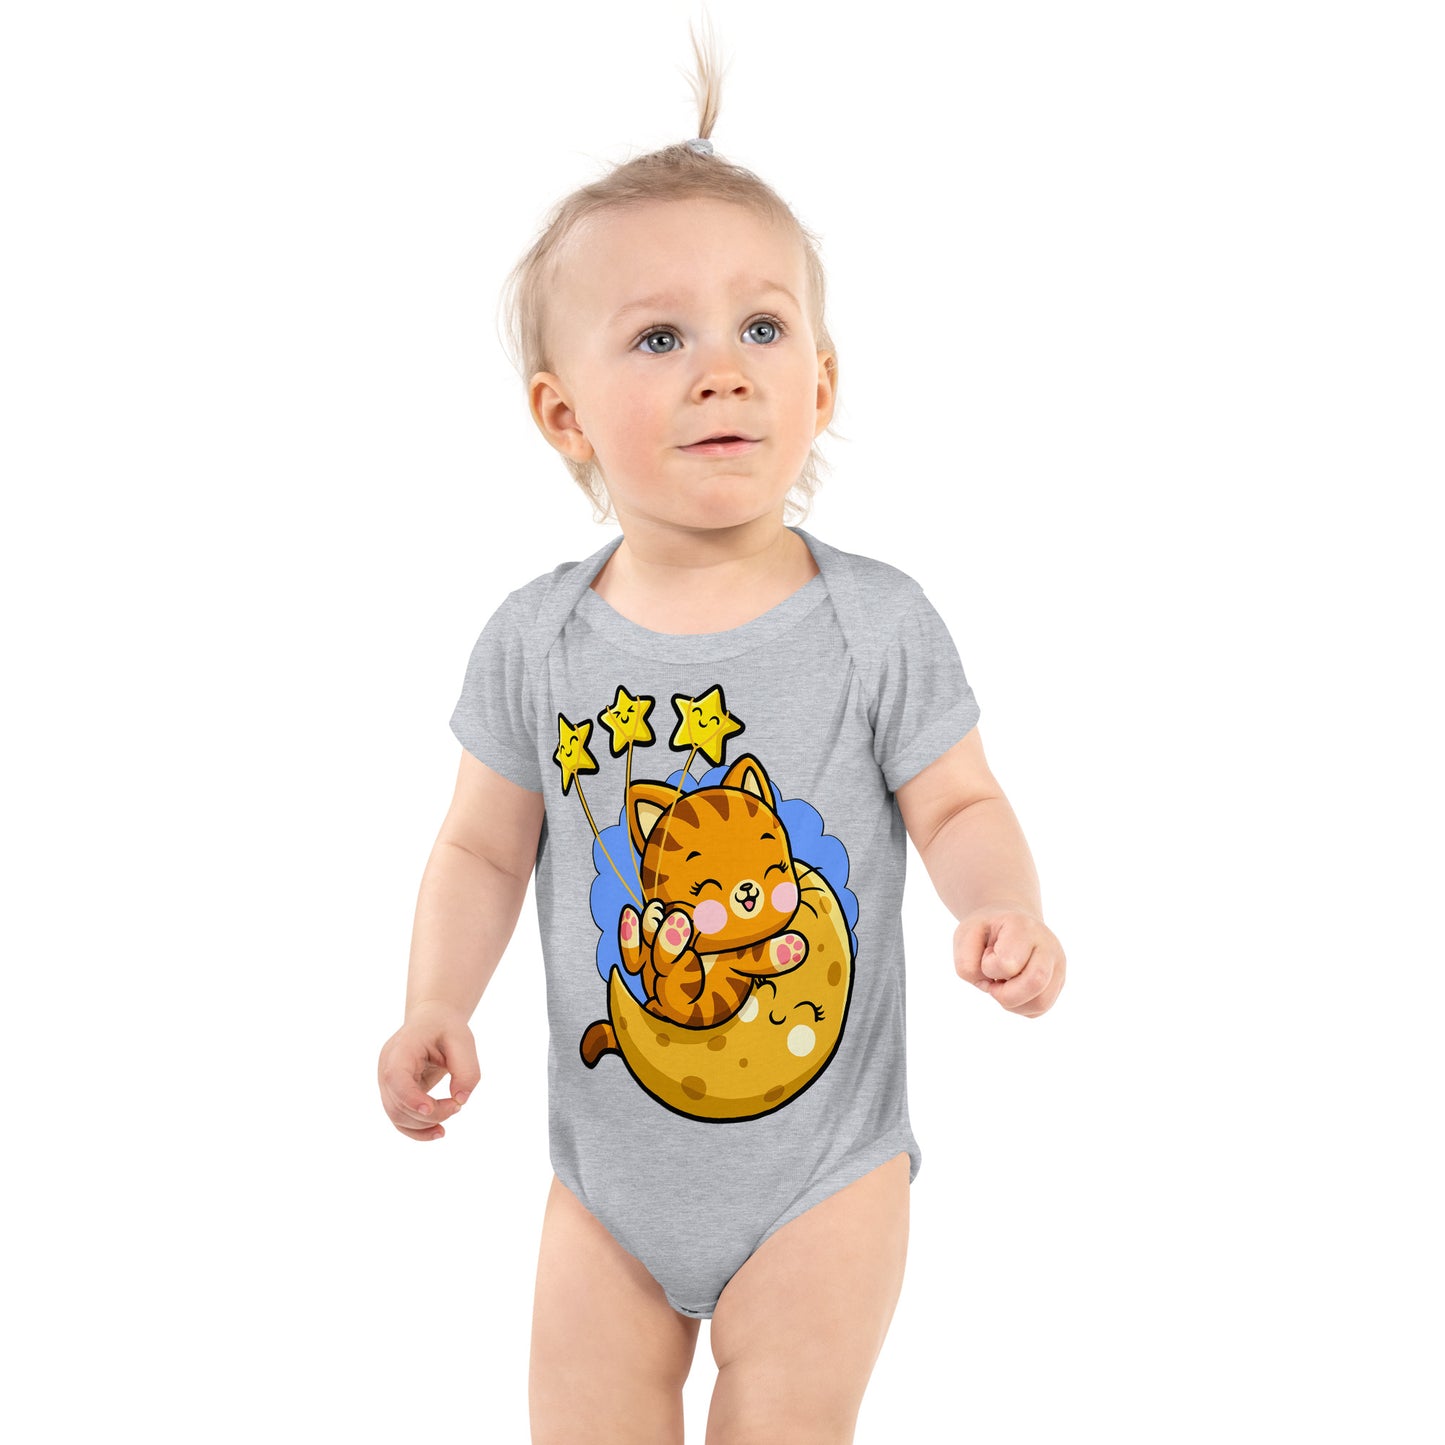 Funny Cat Playing on the Moon Bodysuit, No. 0401